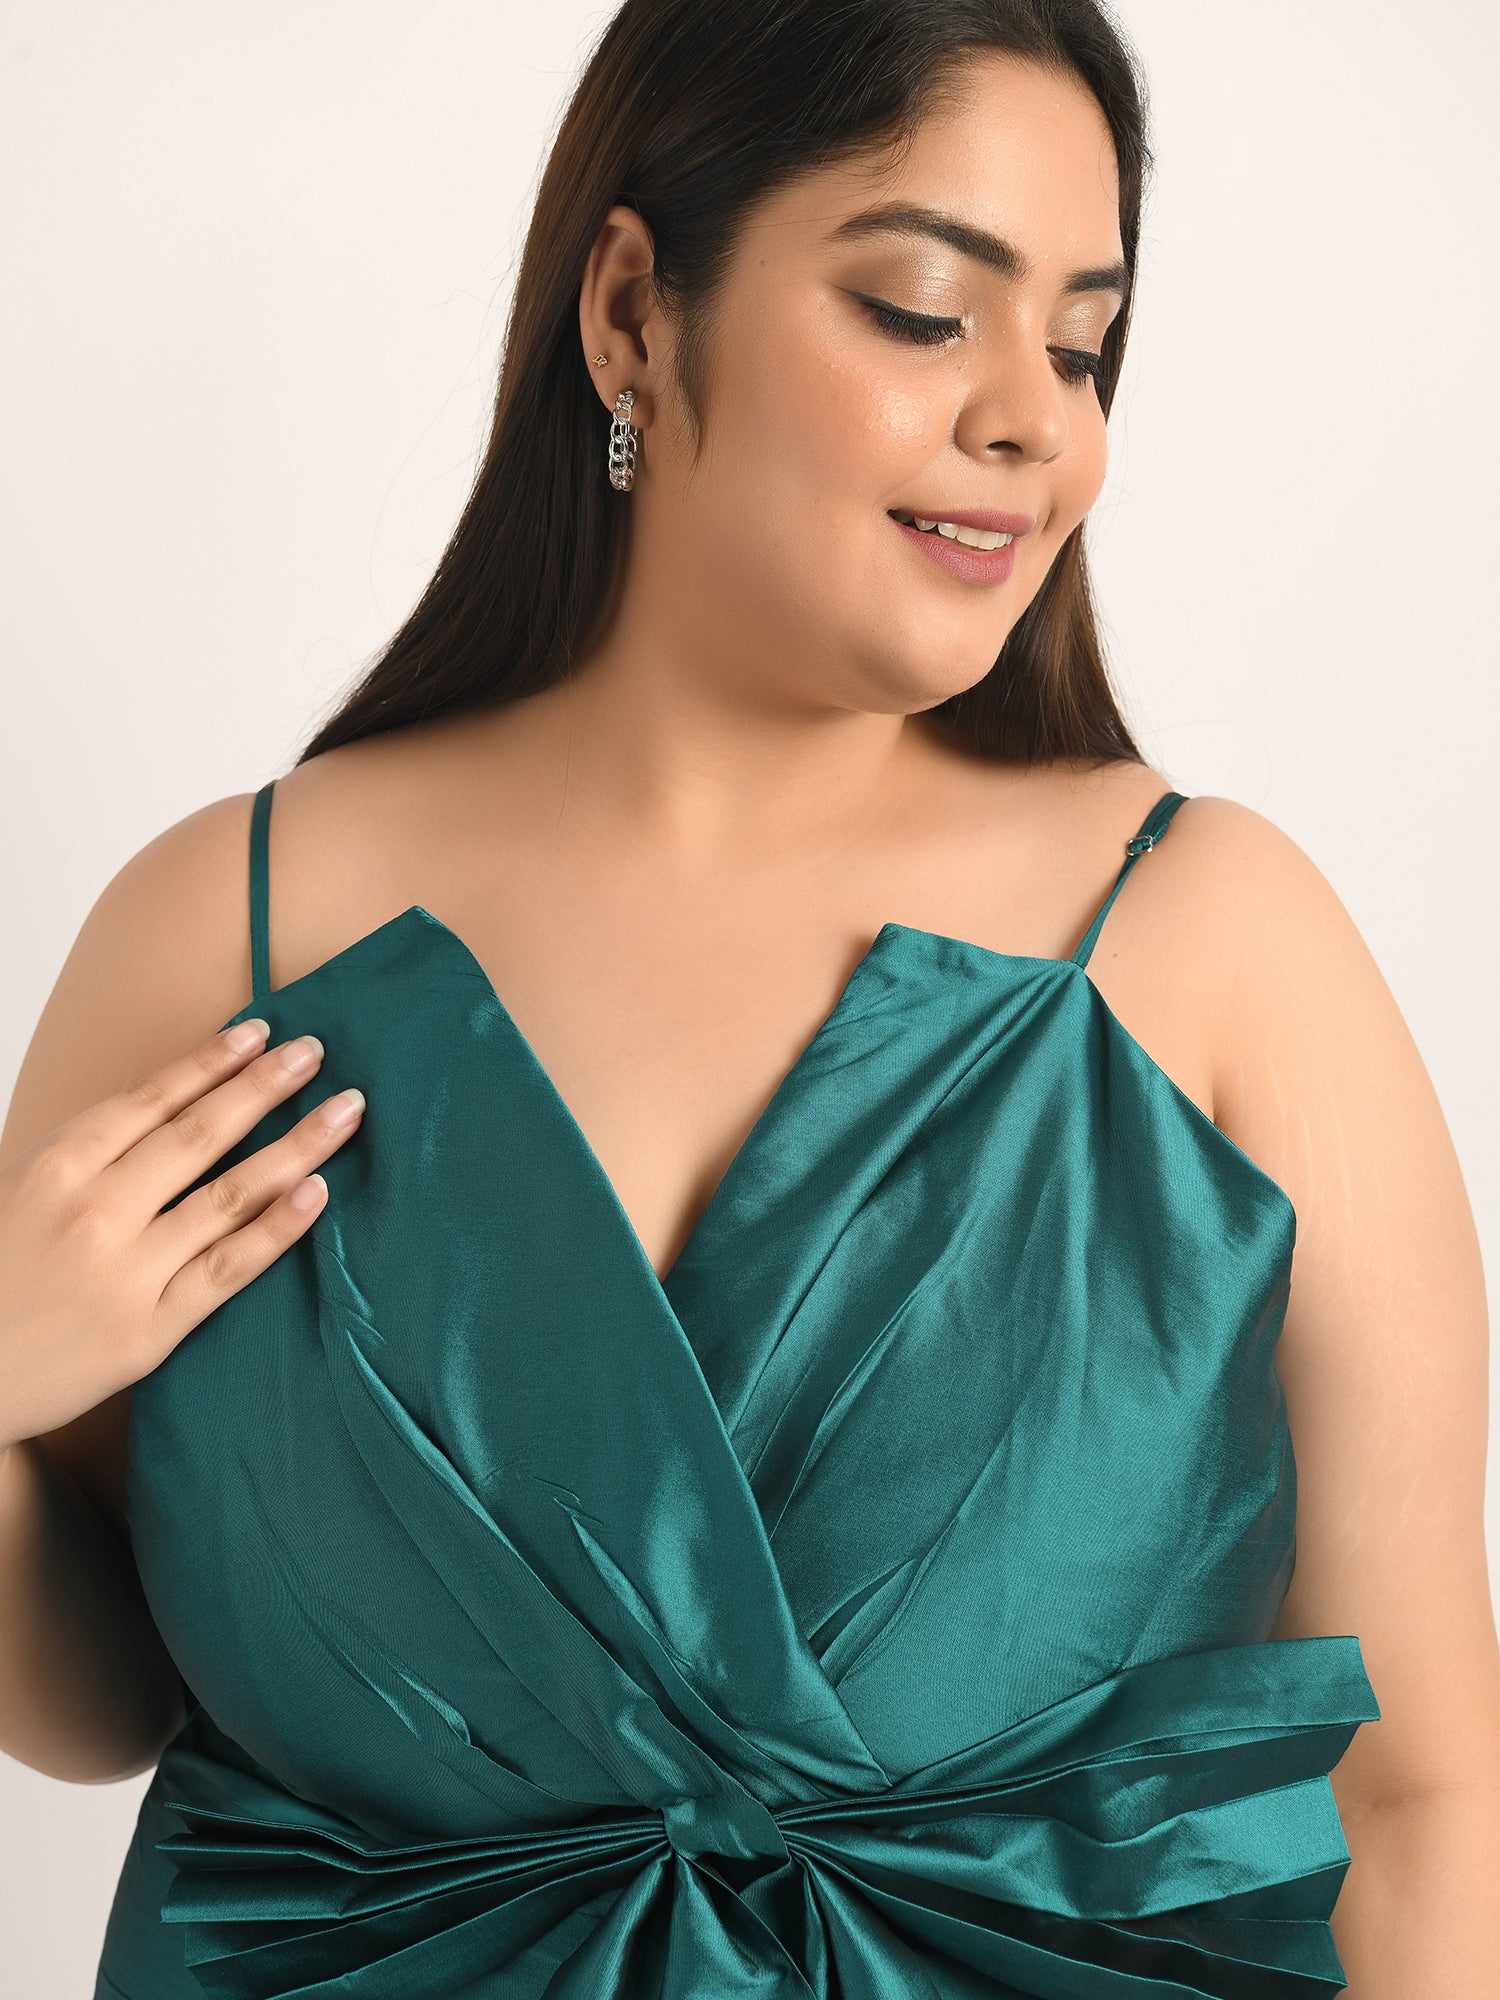 attic curves oversized knot teal dress